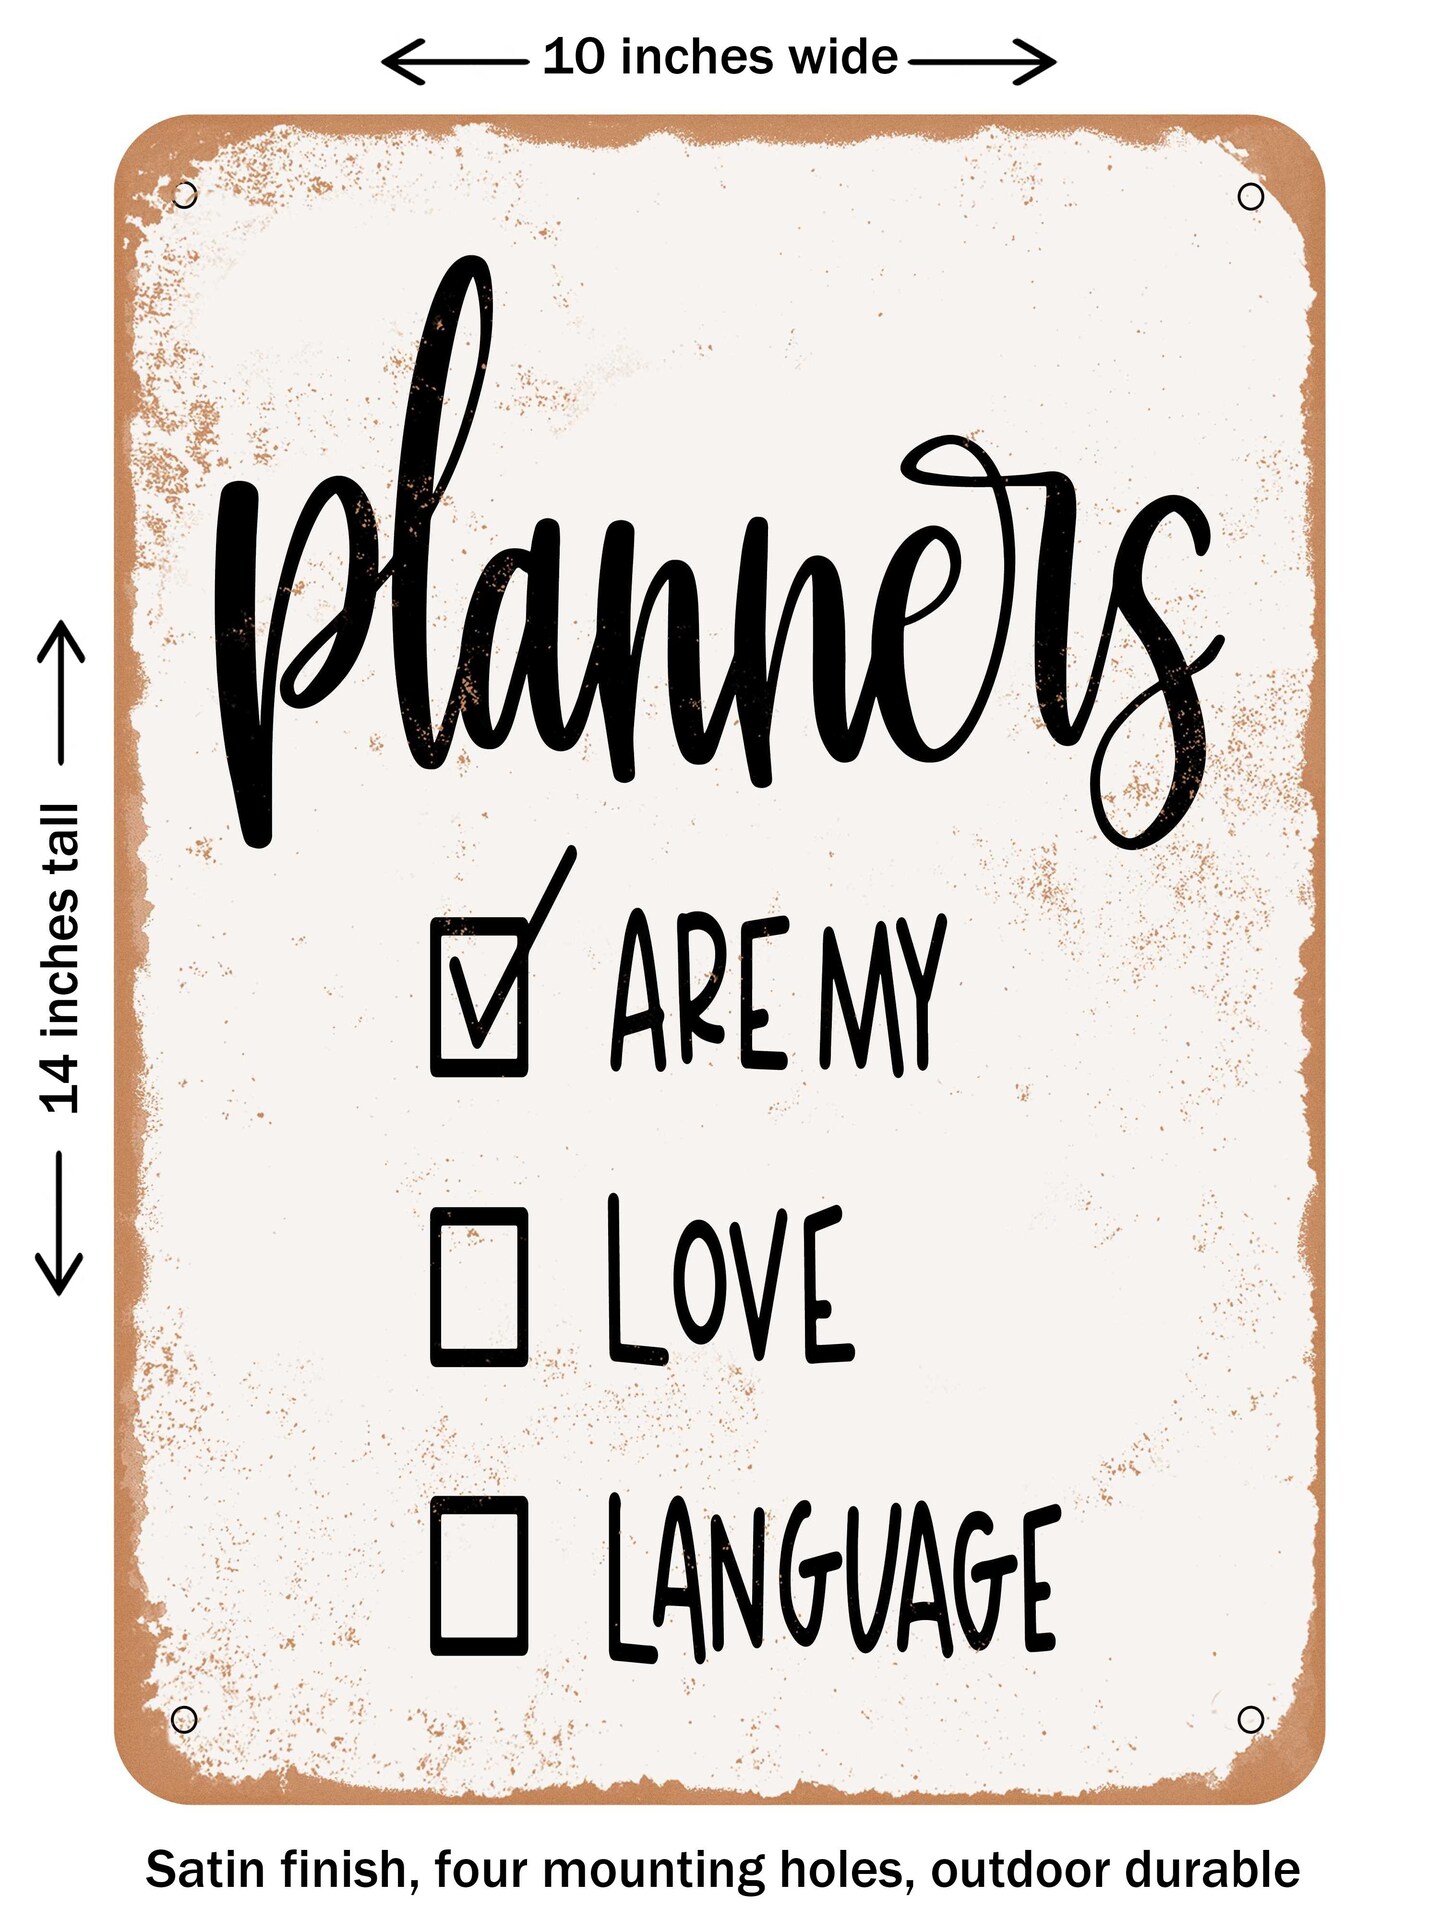 DECORATIVE METAL SIGN - Planners Are My Love Language - Vintage Rusty Look